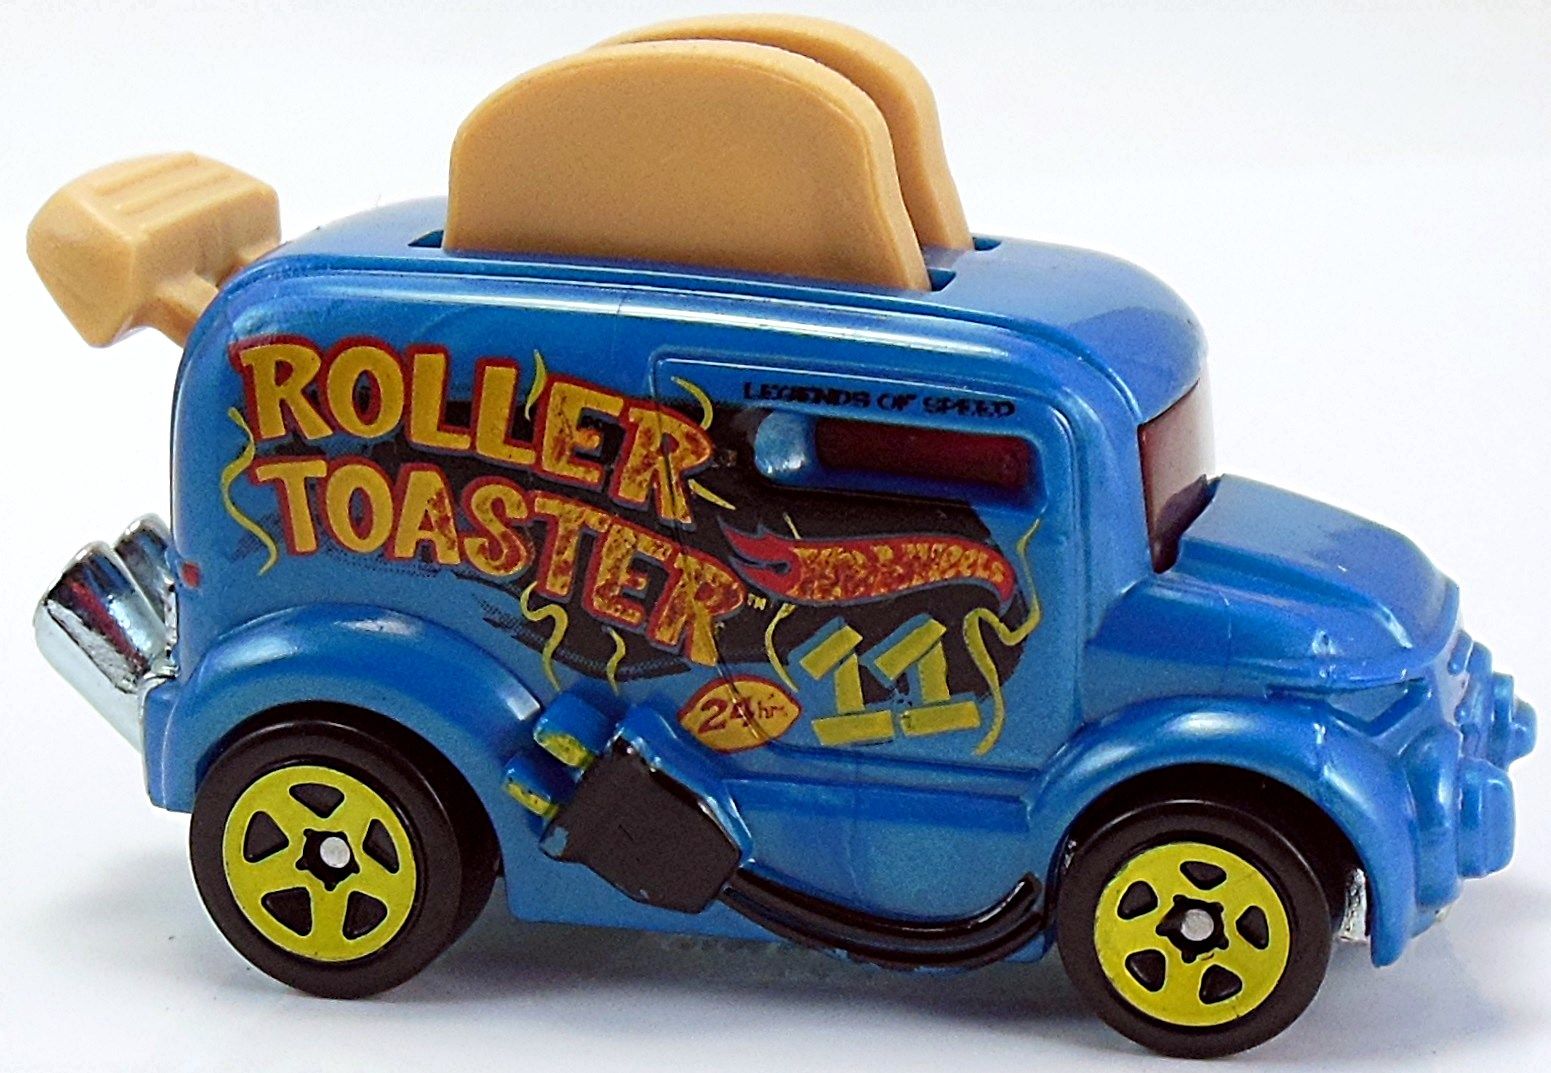 The 15 Worst Hot Wheels Cars Of All Time (And The 15 Best)